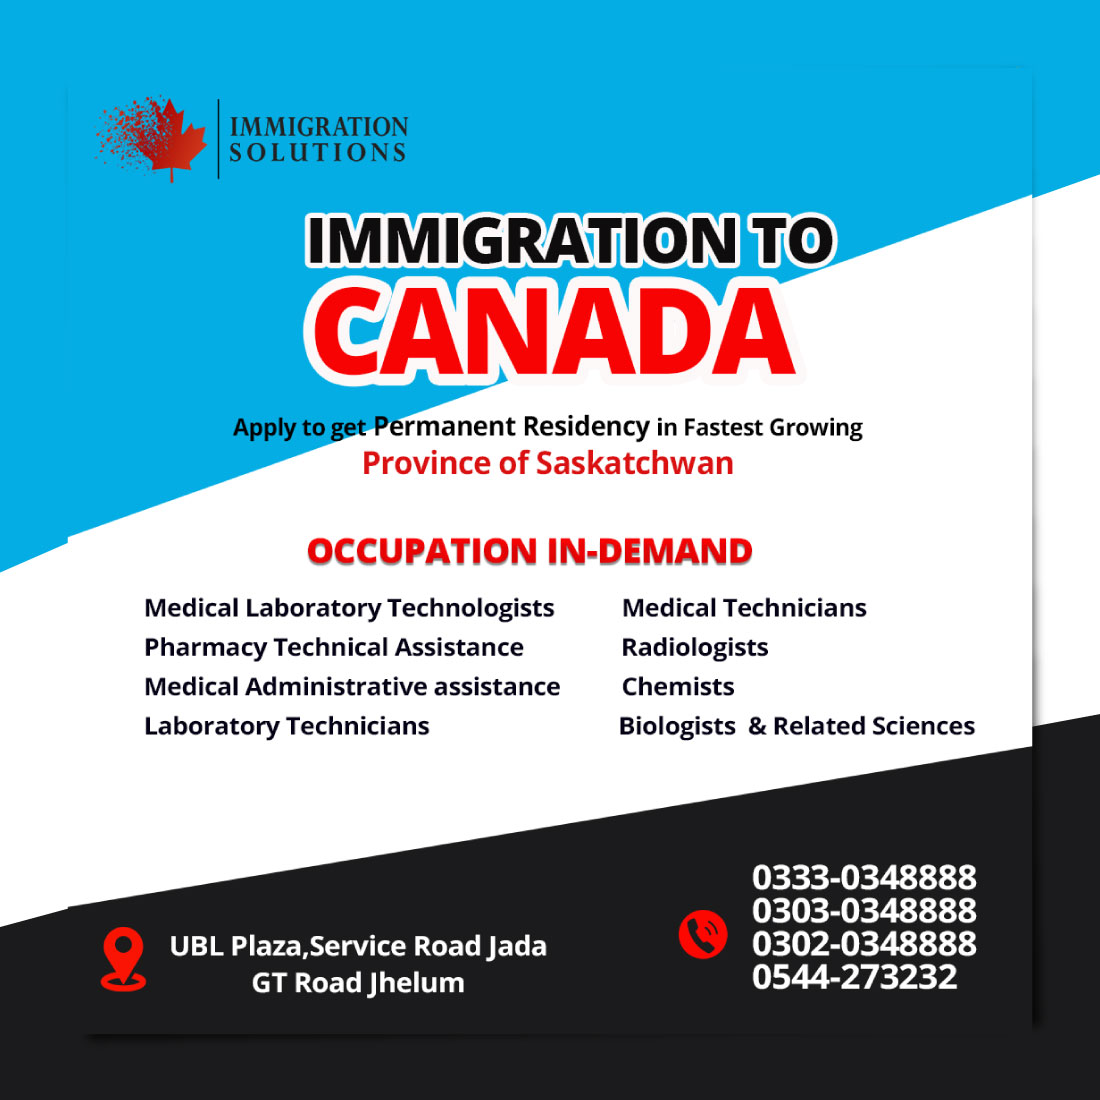 Immigration post for canada| New post design ideas preview image.